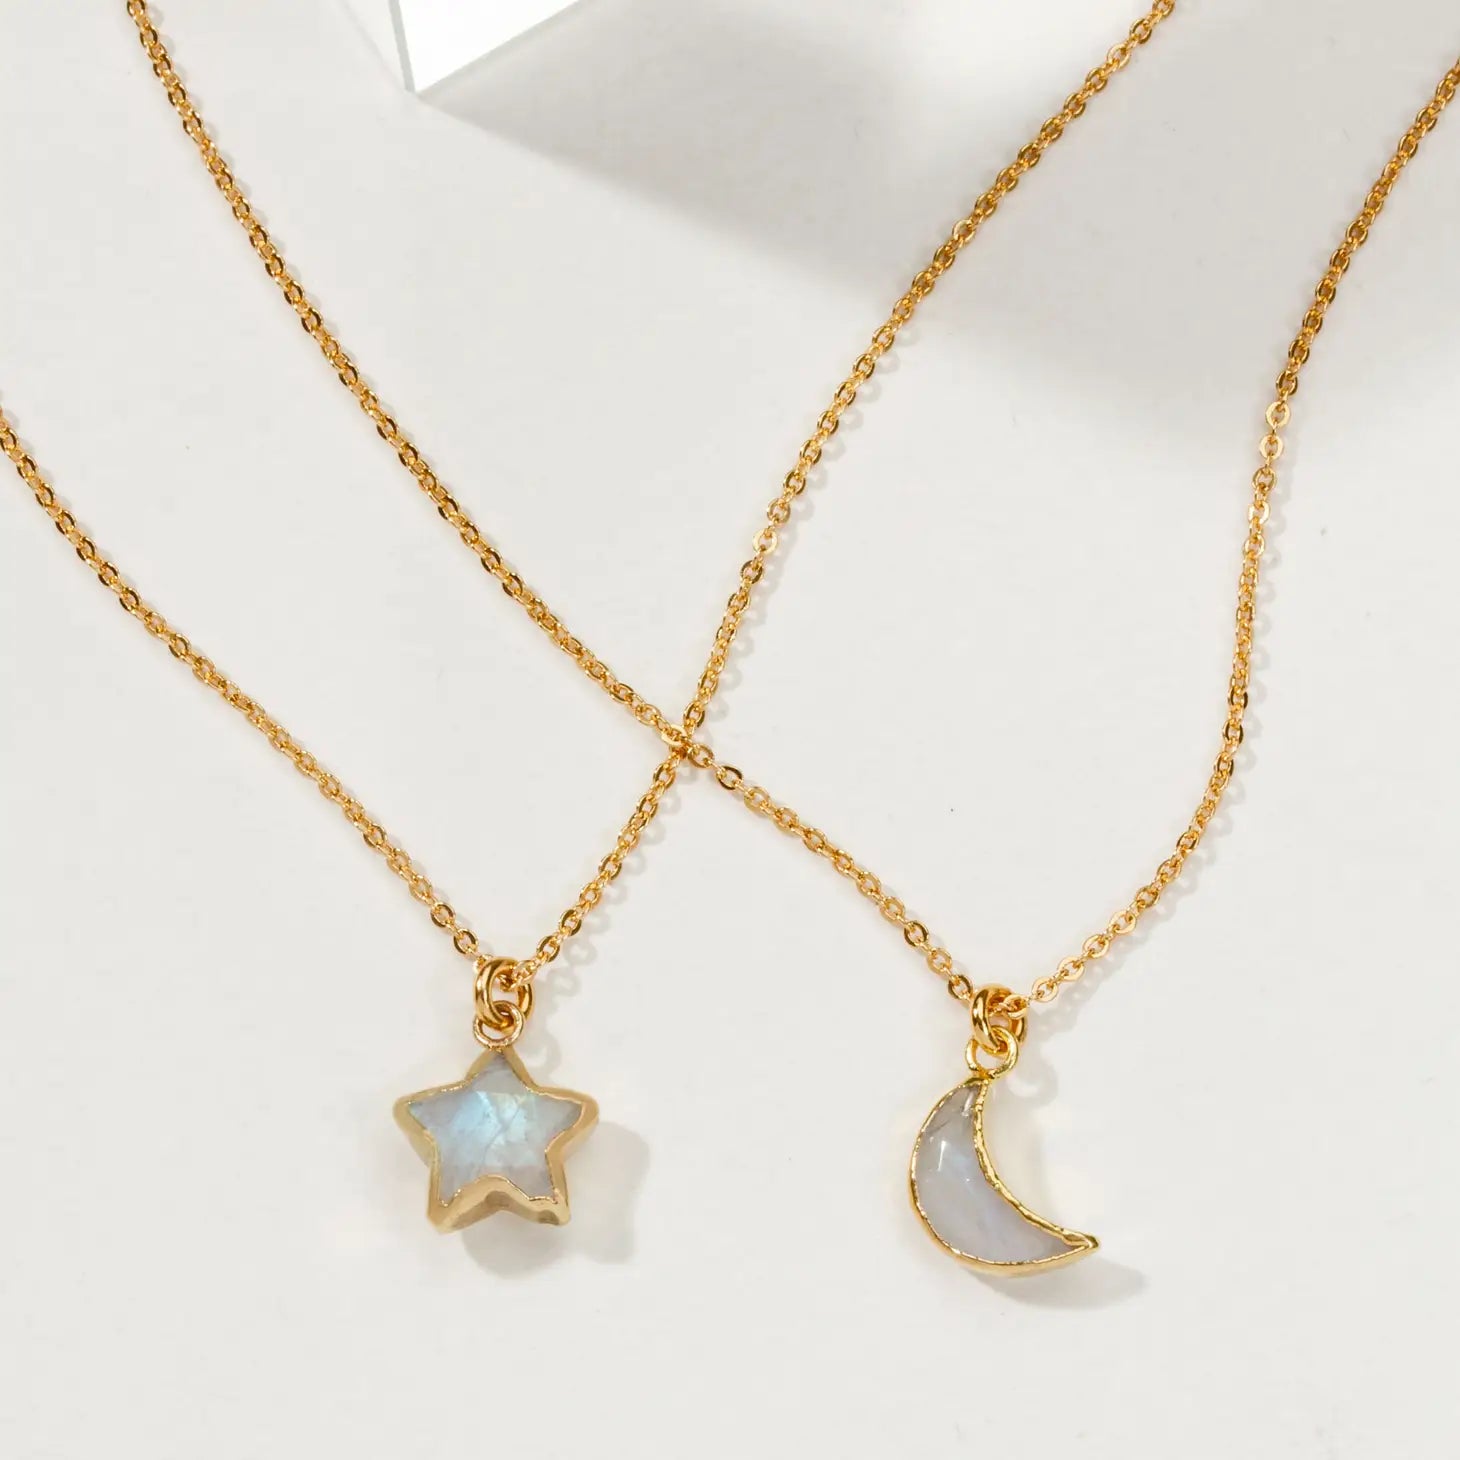 YGT 4 Piece Set Best Friend Friendship Necklace Sun Moon Cloud And Star  Inlaid Rhinestone Stitching BFF Pendant Fashion Jewelry Gift|Pendant  Necklaces | Shopee Singapore